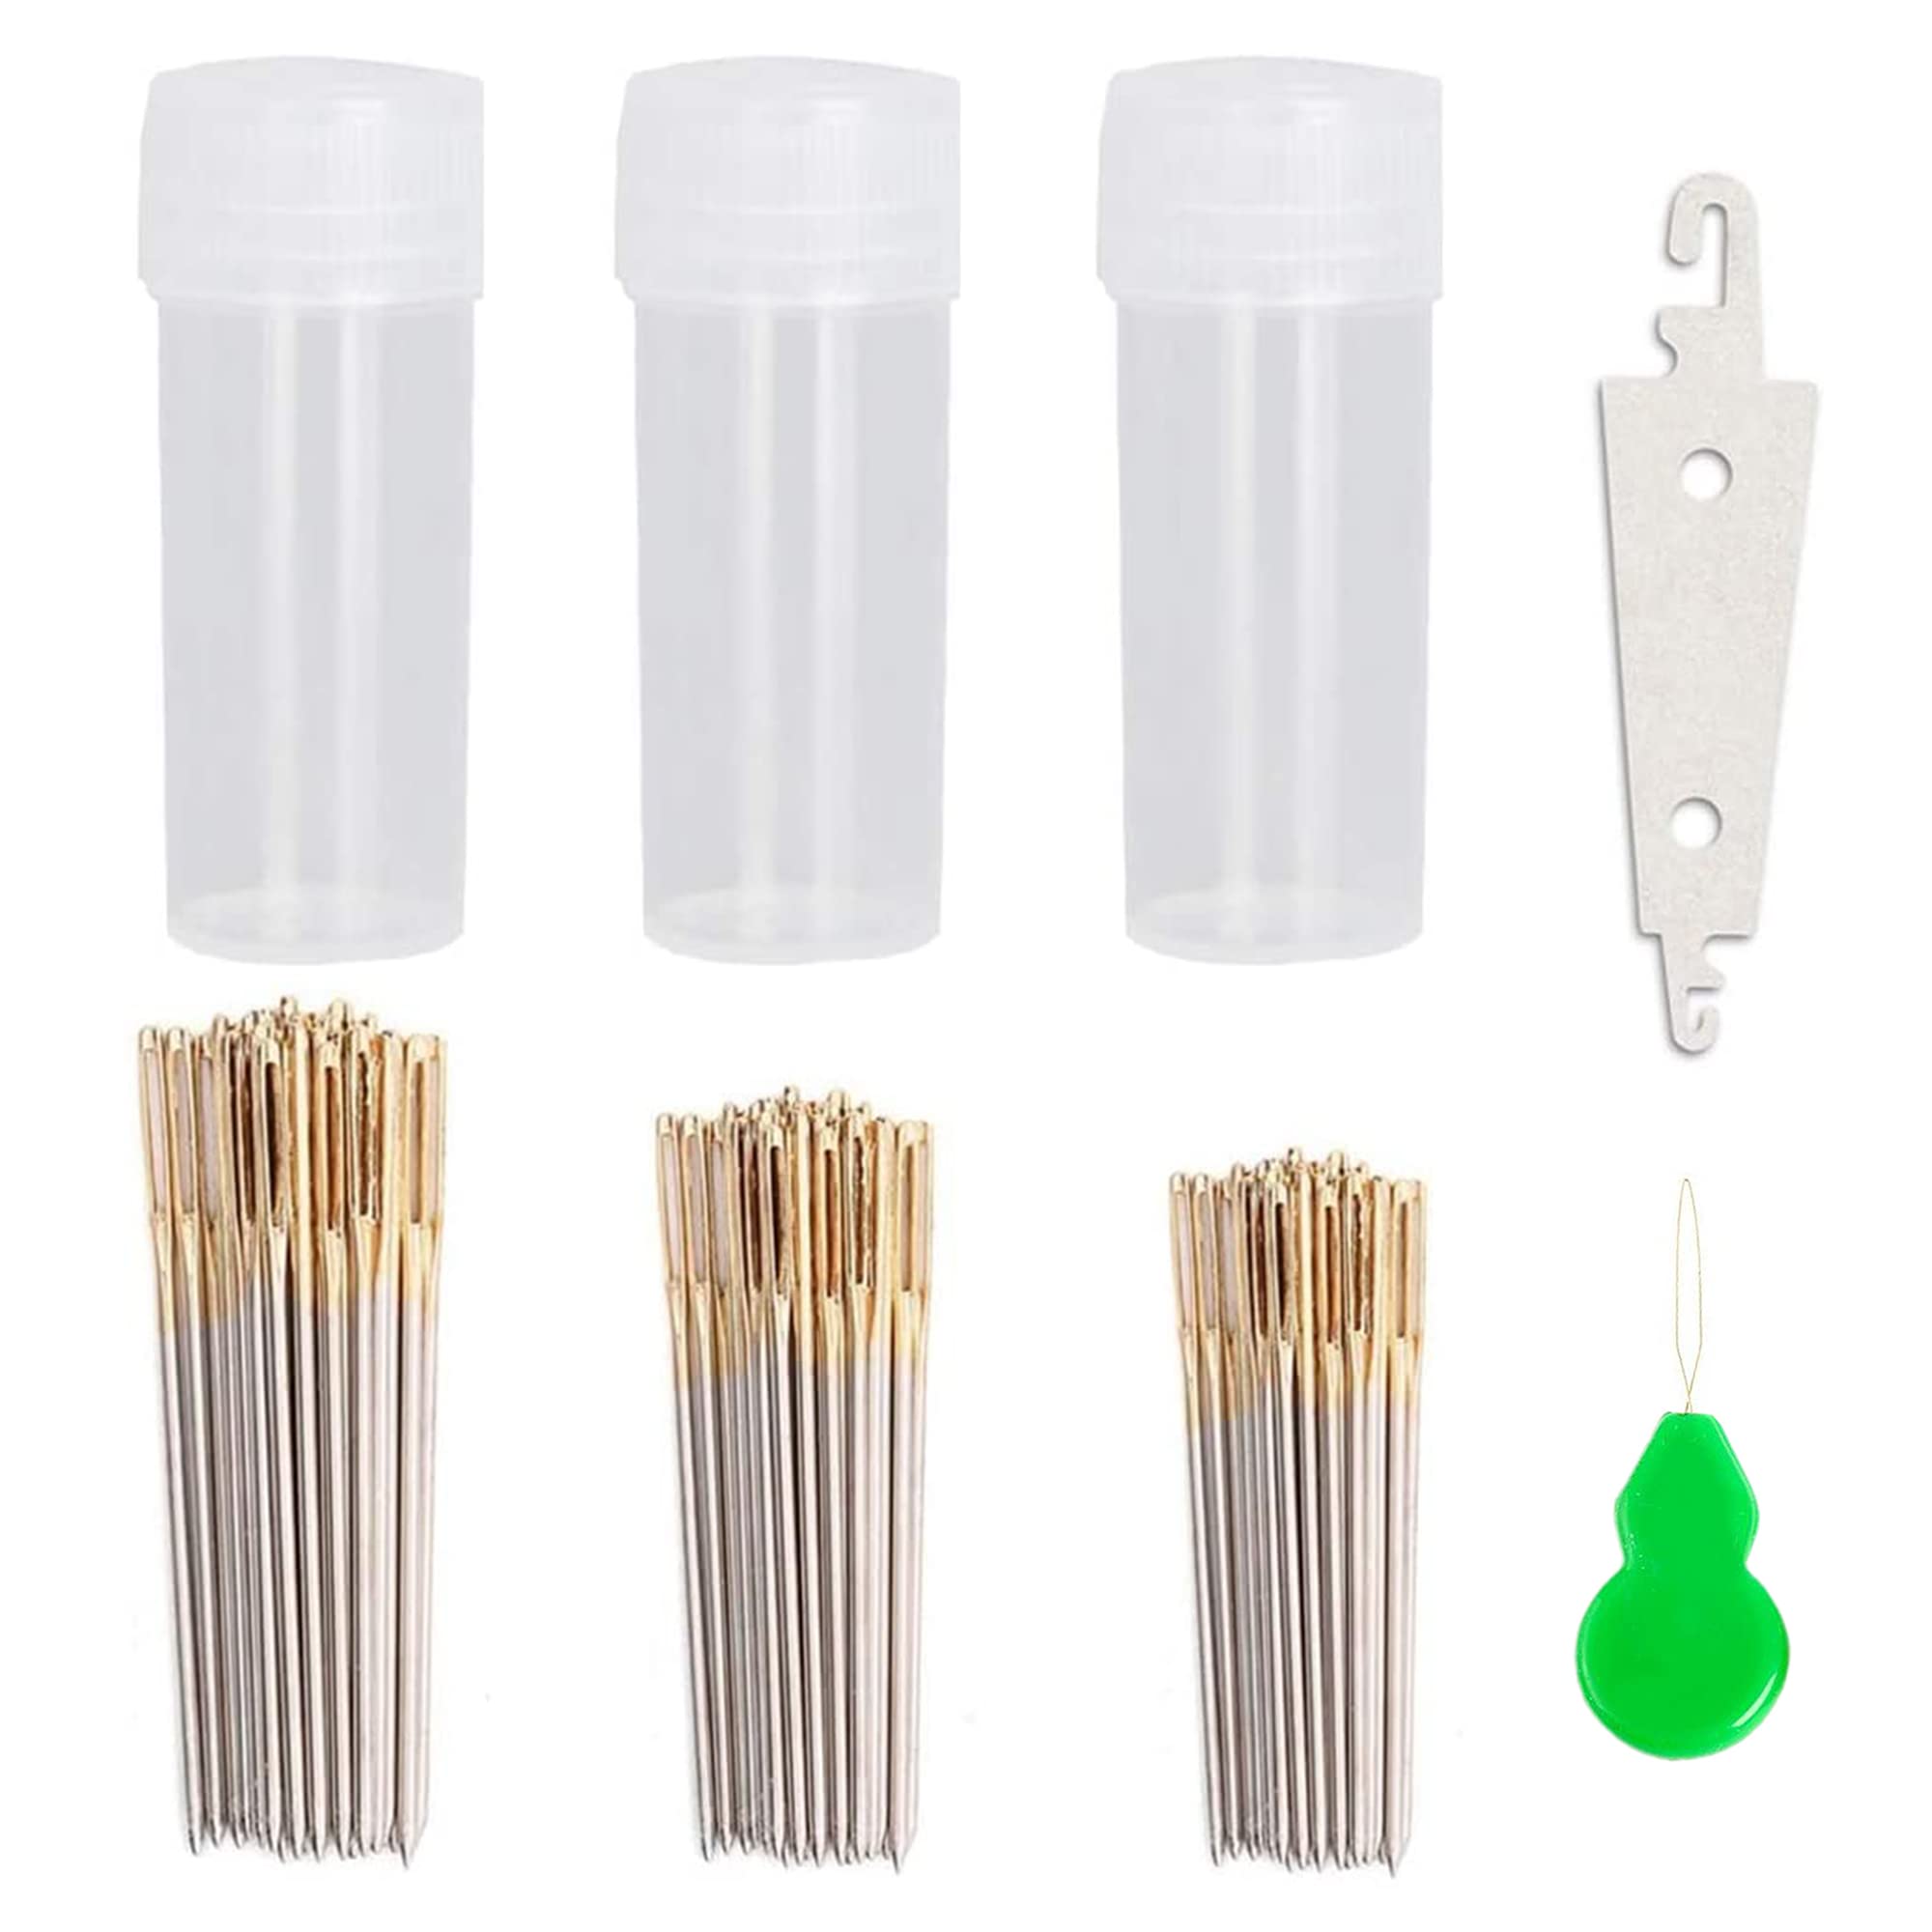 90pcs Cross Stitch Needles +2 Needle Threader Golden Color Large Eyes Cross  Stitch DIY Embroidery Hand Needles Sewing Needles in Transparent Box Size  22 24 26 22+24+26